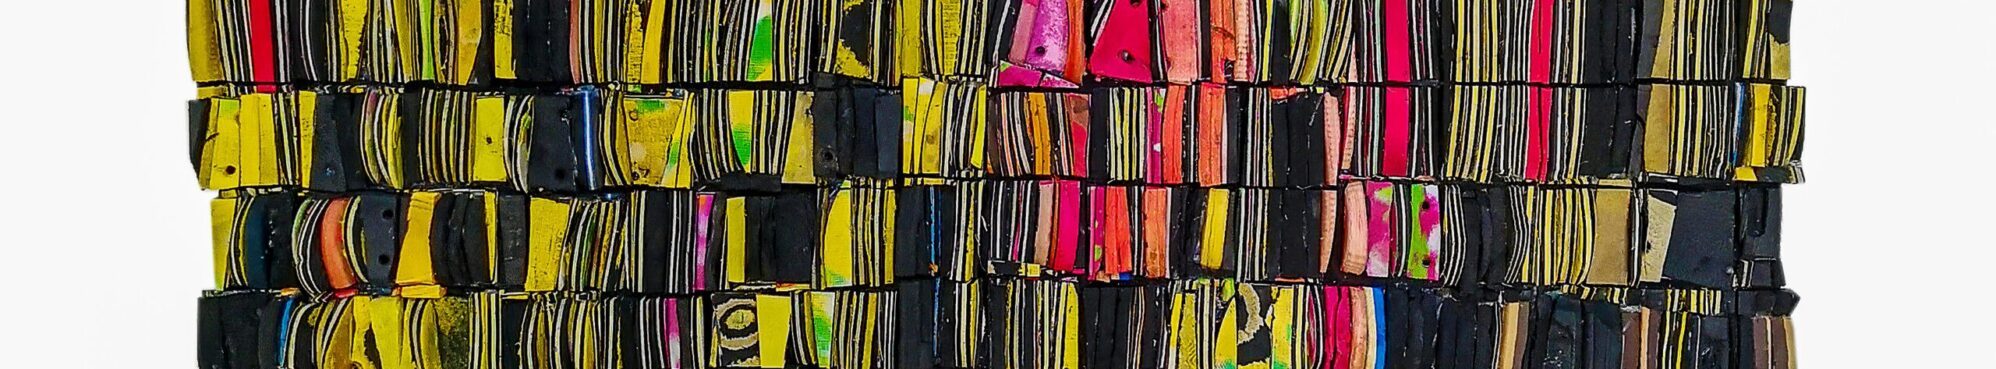 Patrick Tagoe-Turkson - Mpua - 2021 - 124cm H x 119cm W - Found upcycled Flip-flops on suede